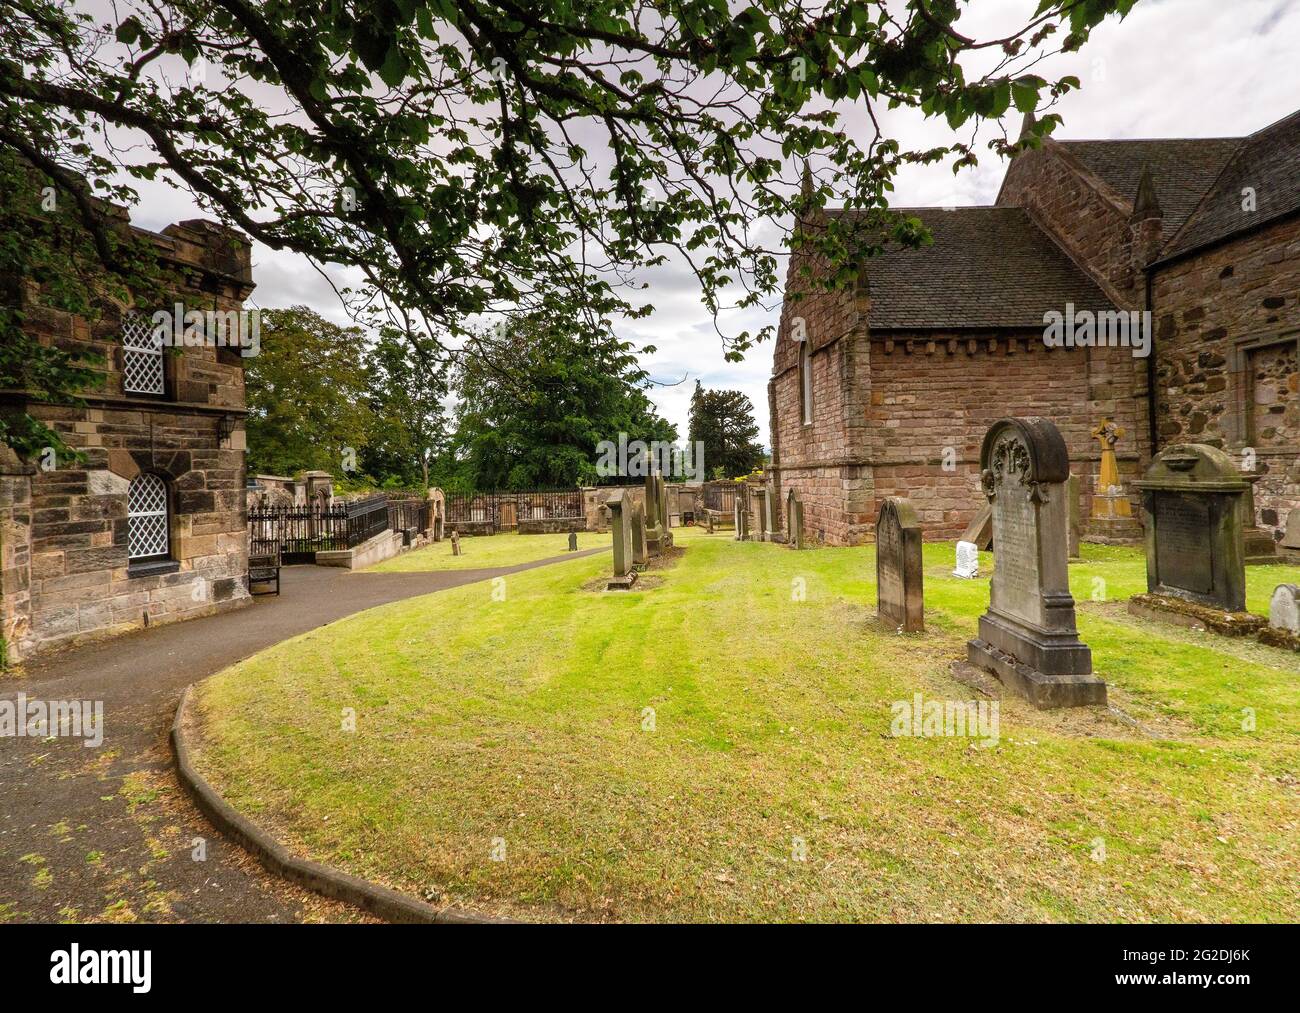 Duddingston Kirk and Graveyard which dates back to the 12 Century and one of the oldest churches t in Edinburgh, Edinburgh, Scotland, UK Stock Photo